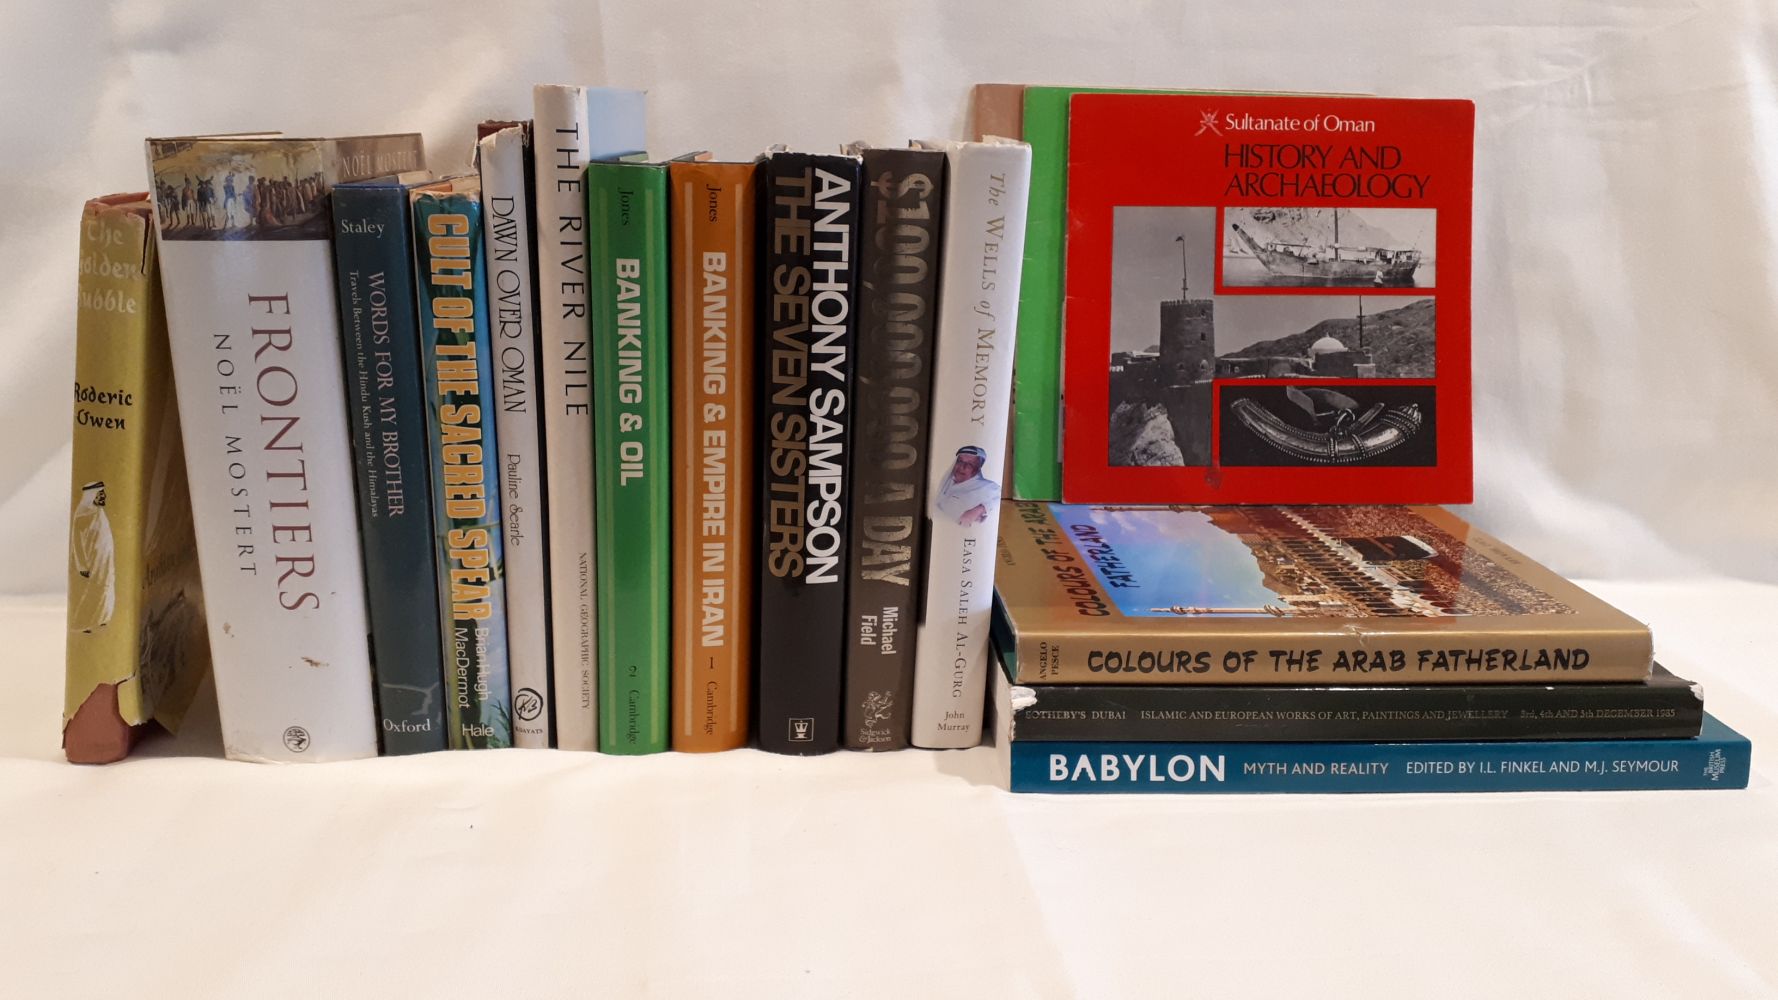 A MIXED BOOK LOT: Selection of books on the Middle East, includes Owen, Roderic, The Golden